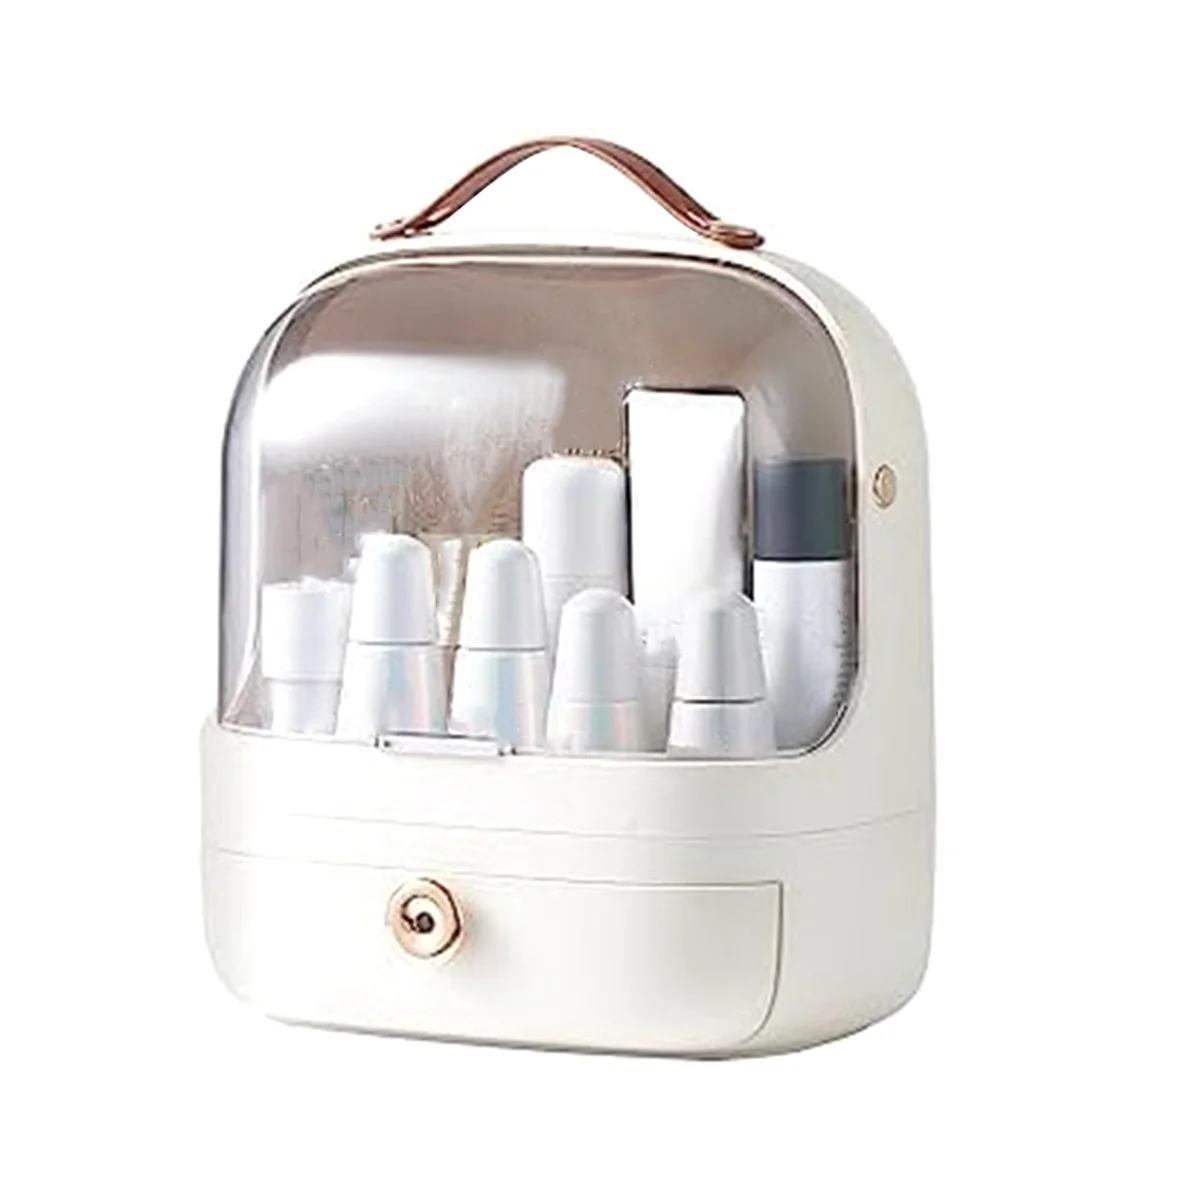 

Makeup Organizer for Vanity, Make Up Organizers and Storage with Brush Holder, Skincare Organizers Cosmetic Display